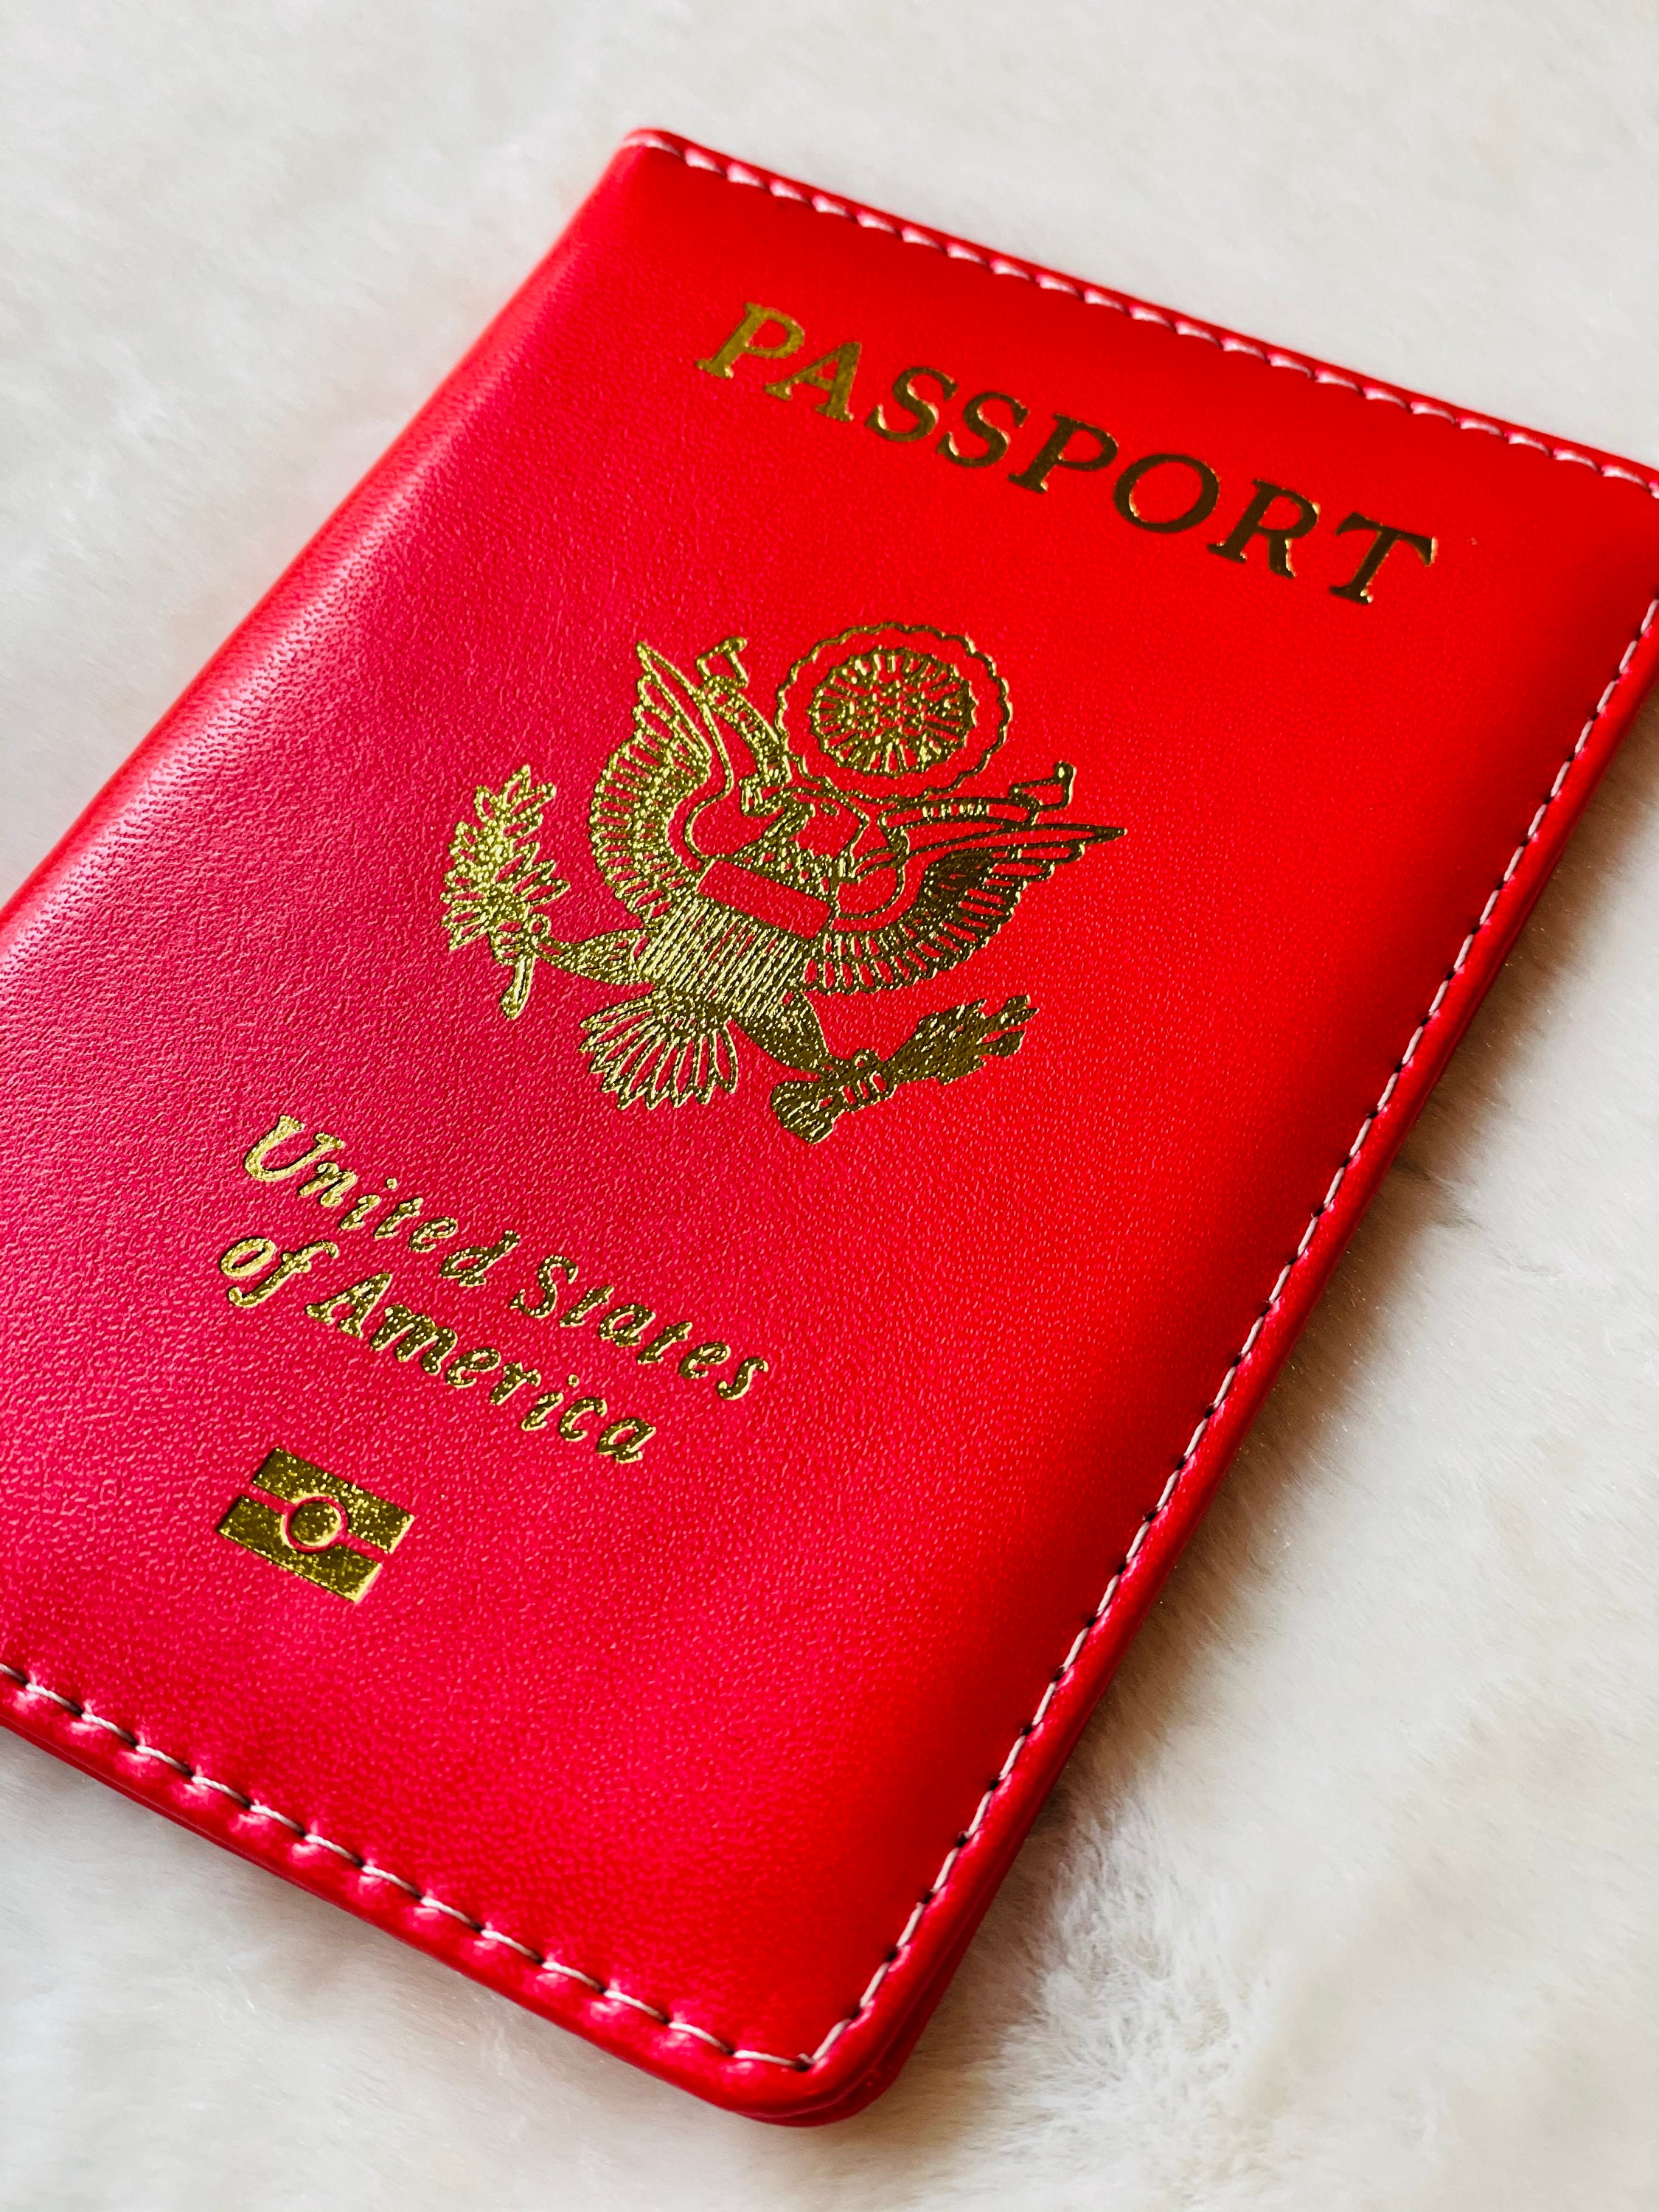 Just got the passport cover from the website, and Yassss - it is